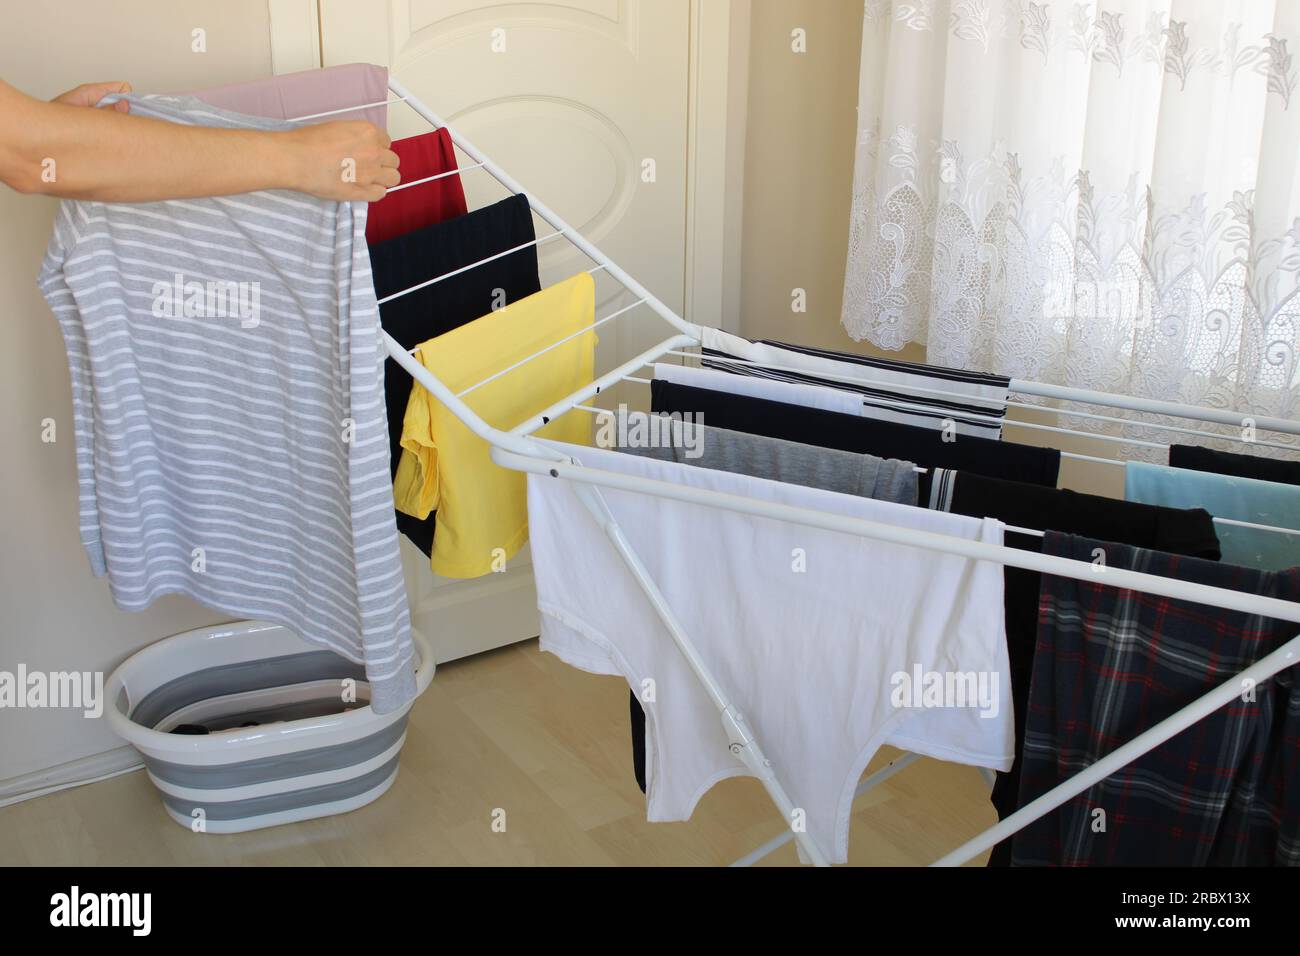 Clean laundry hanging on drying rack in room. Many or lots of washed laundry lined up to be dry. Stock Photo